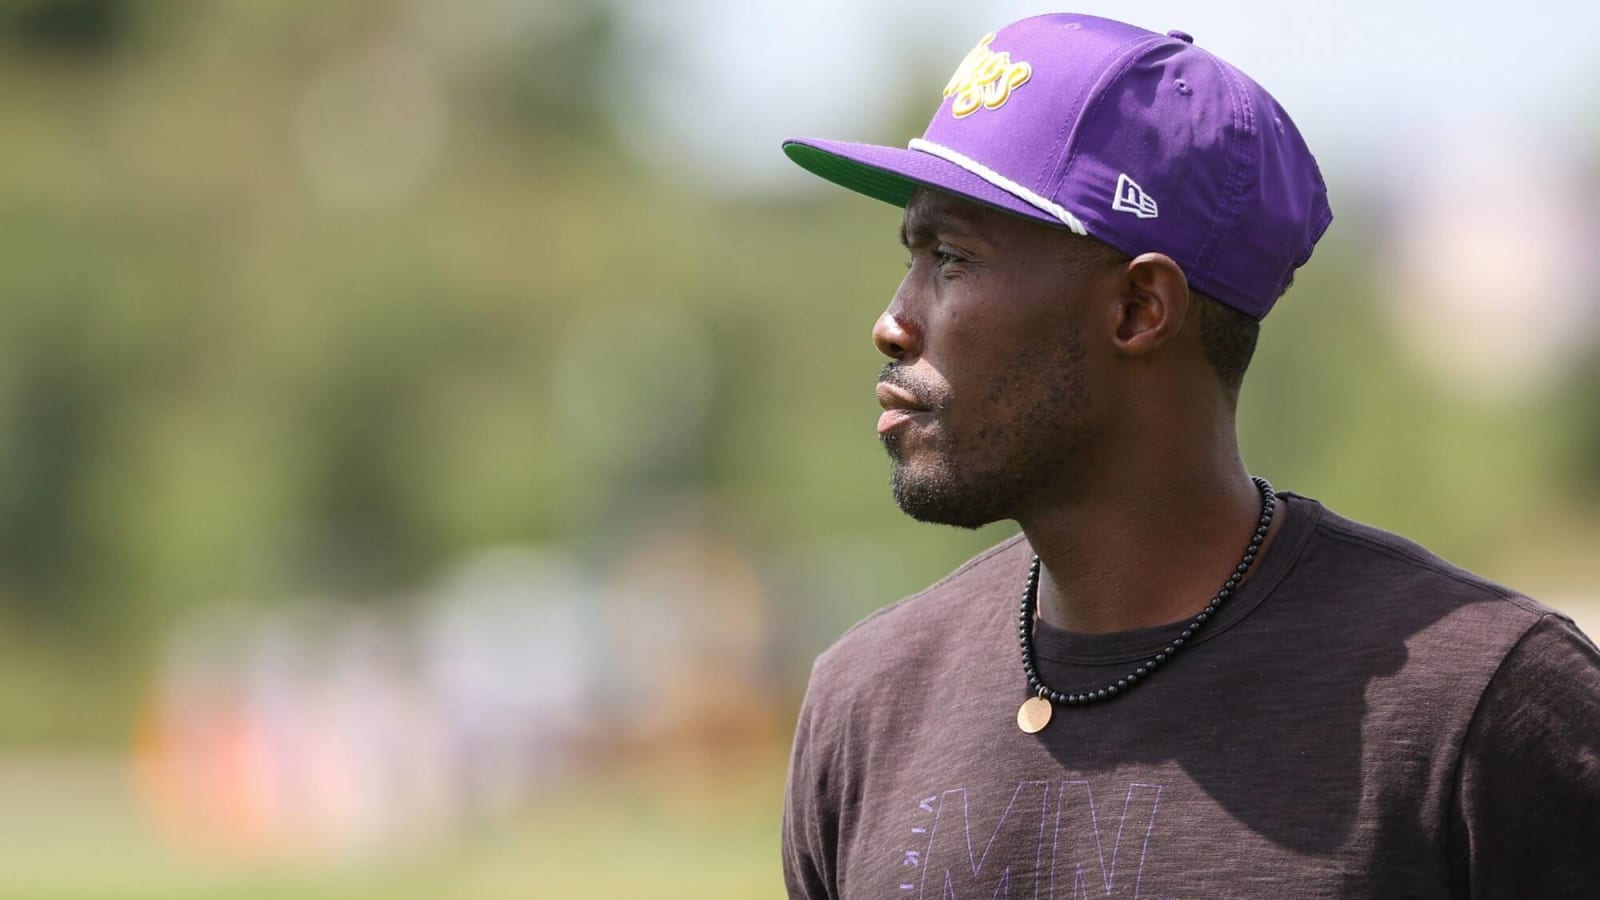 Missing Out on Top QB Could Reportedly Cost Kwesi Adofo-Mensah His Job as Vikings GM